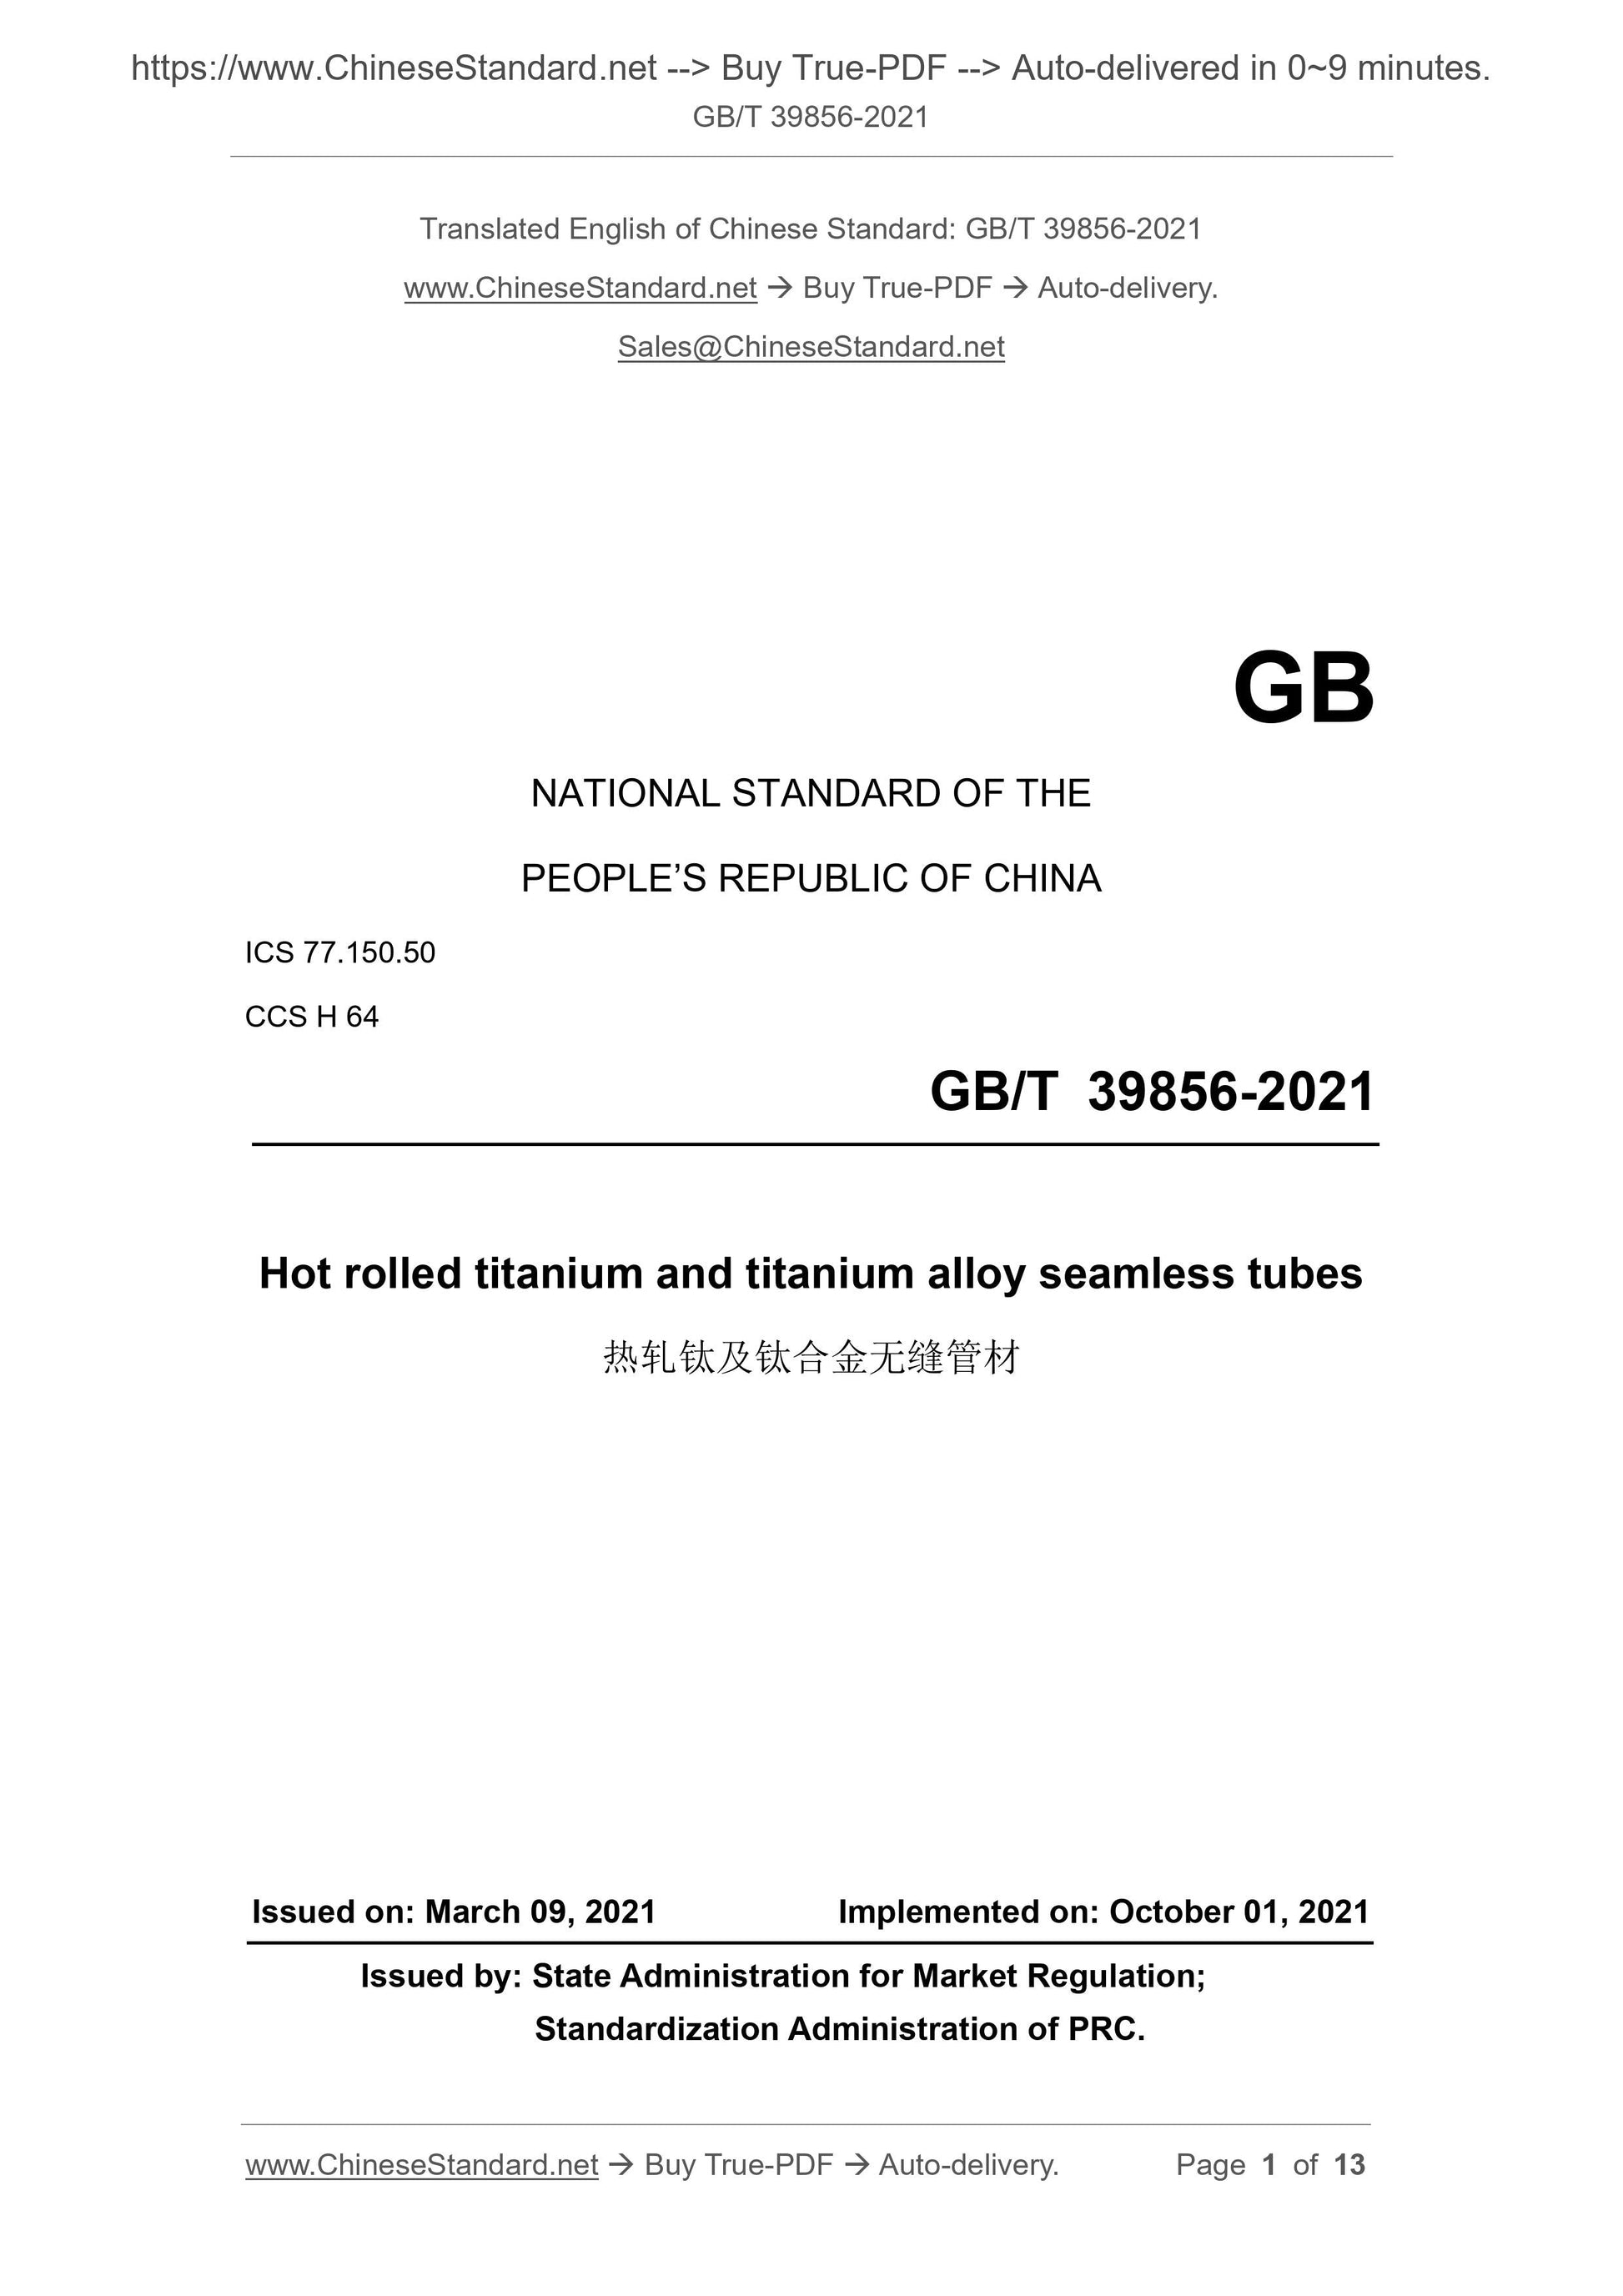 GB/T 39856-2021 Page 1